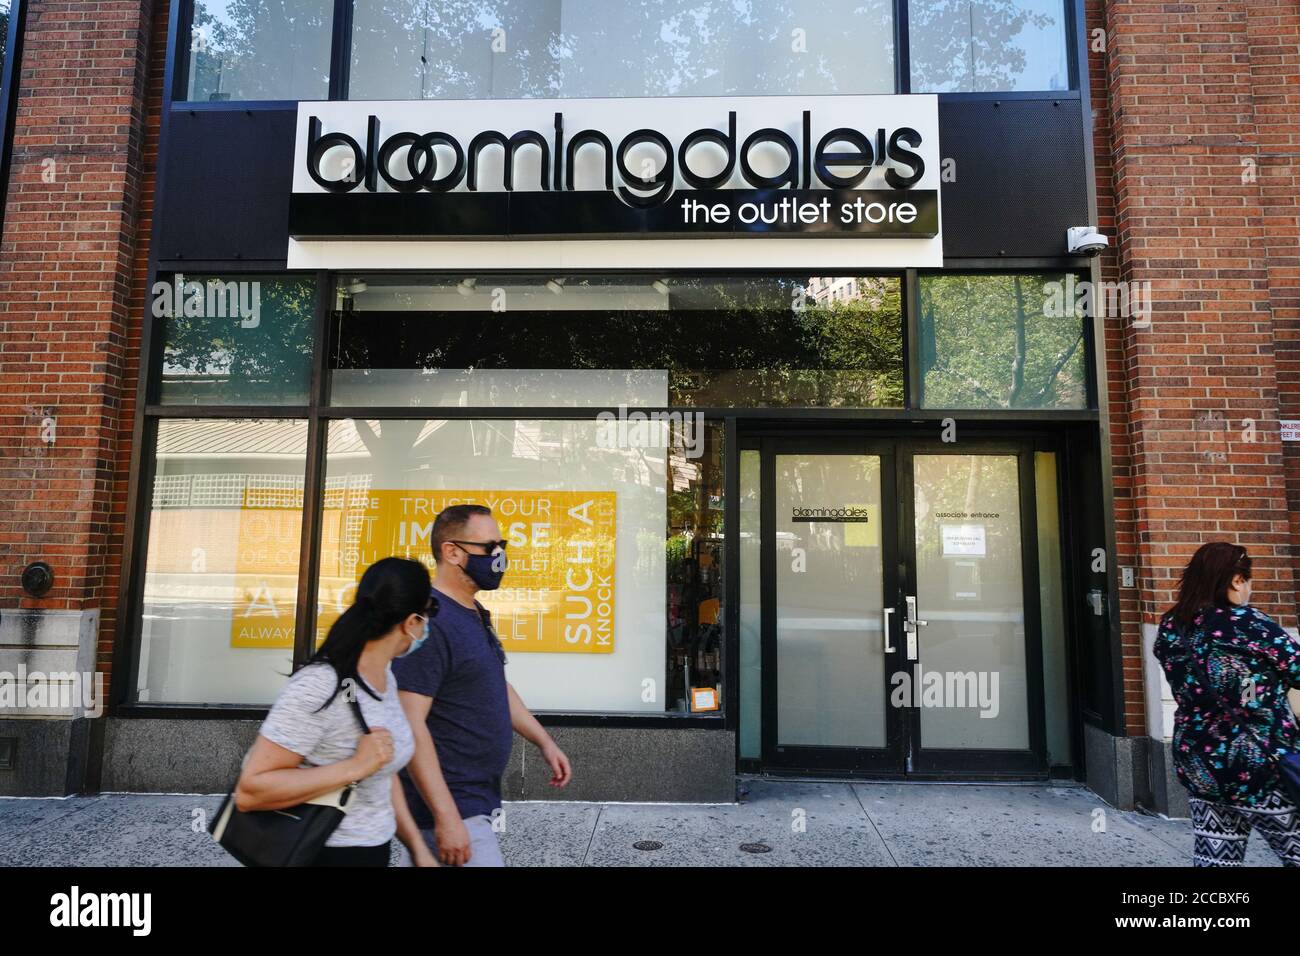 Bloomingdale's to open an outlet store in Manhattan's Upper West Side